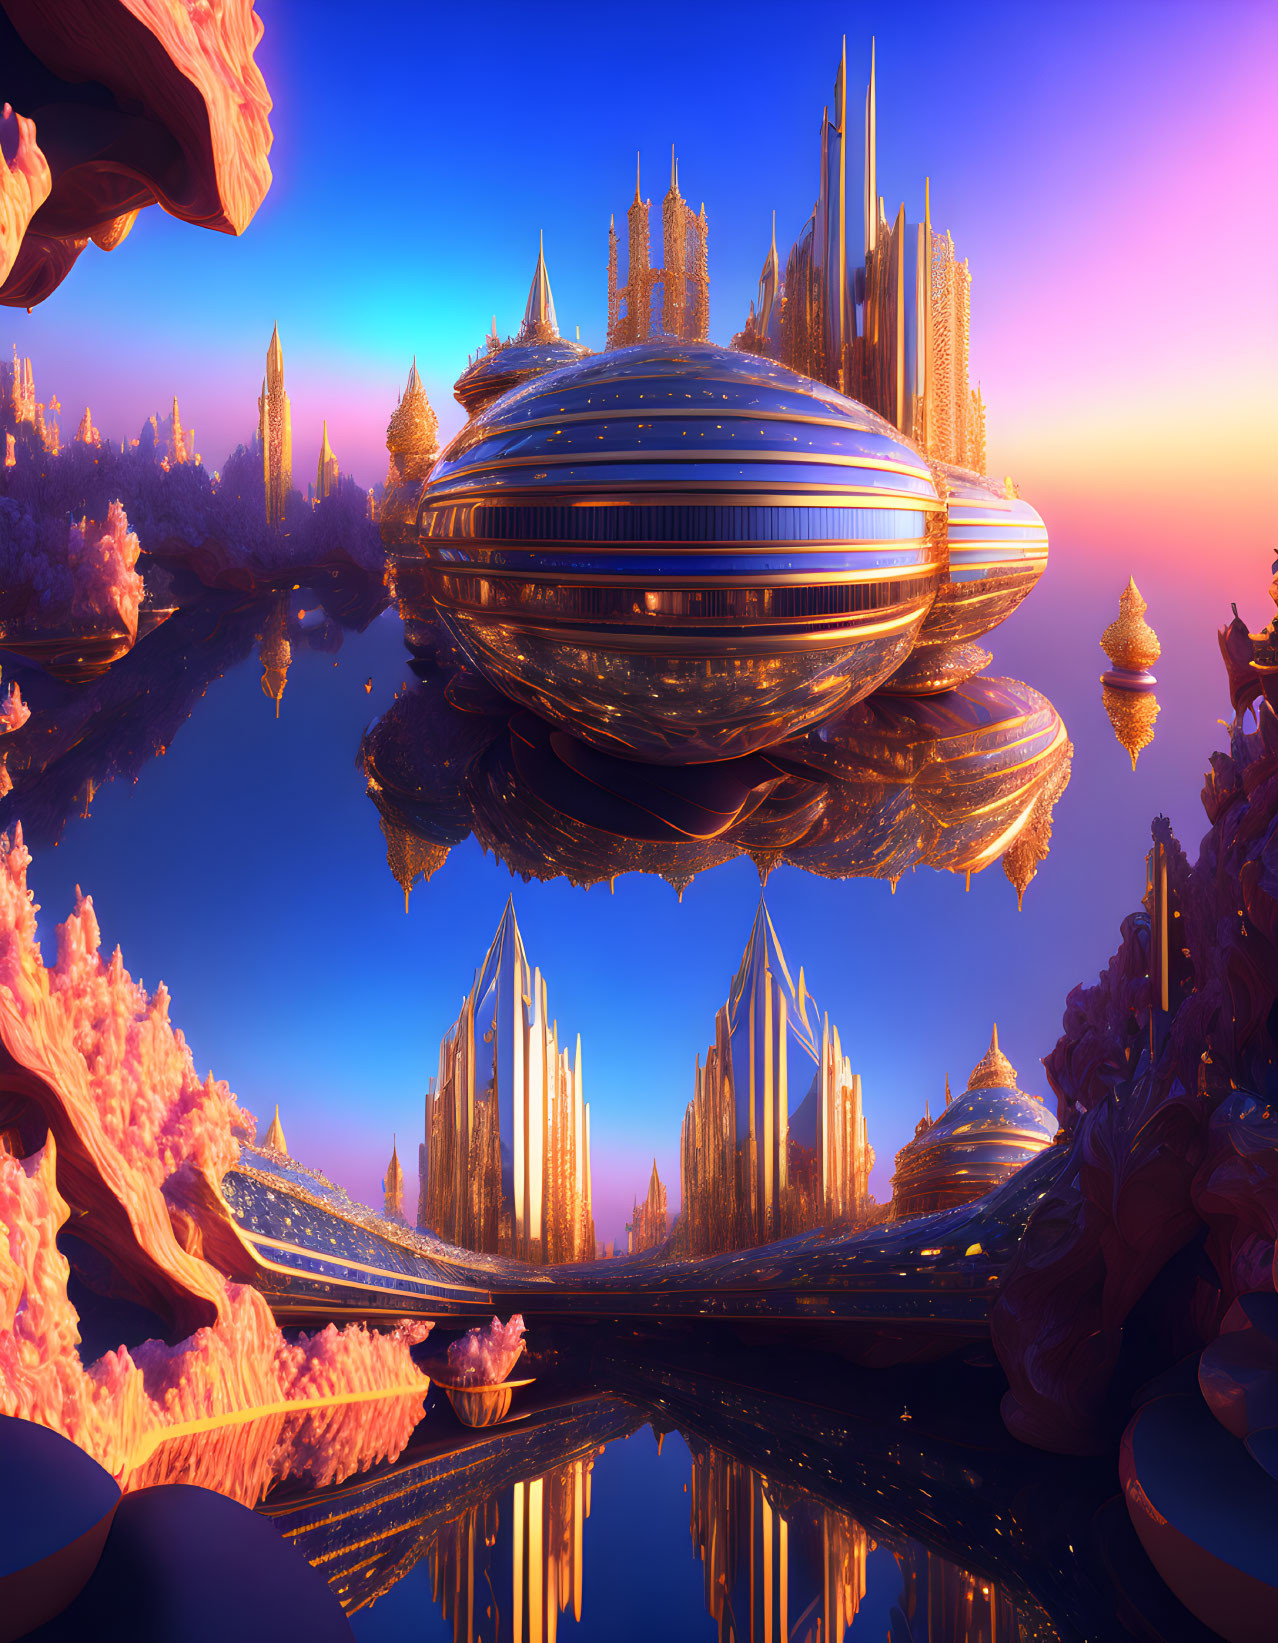 Futuristic cityscape with metallic structures reflected in water at dawn or dusk